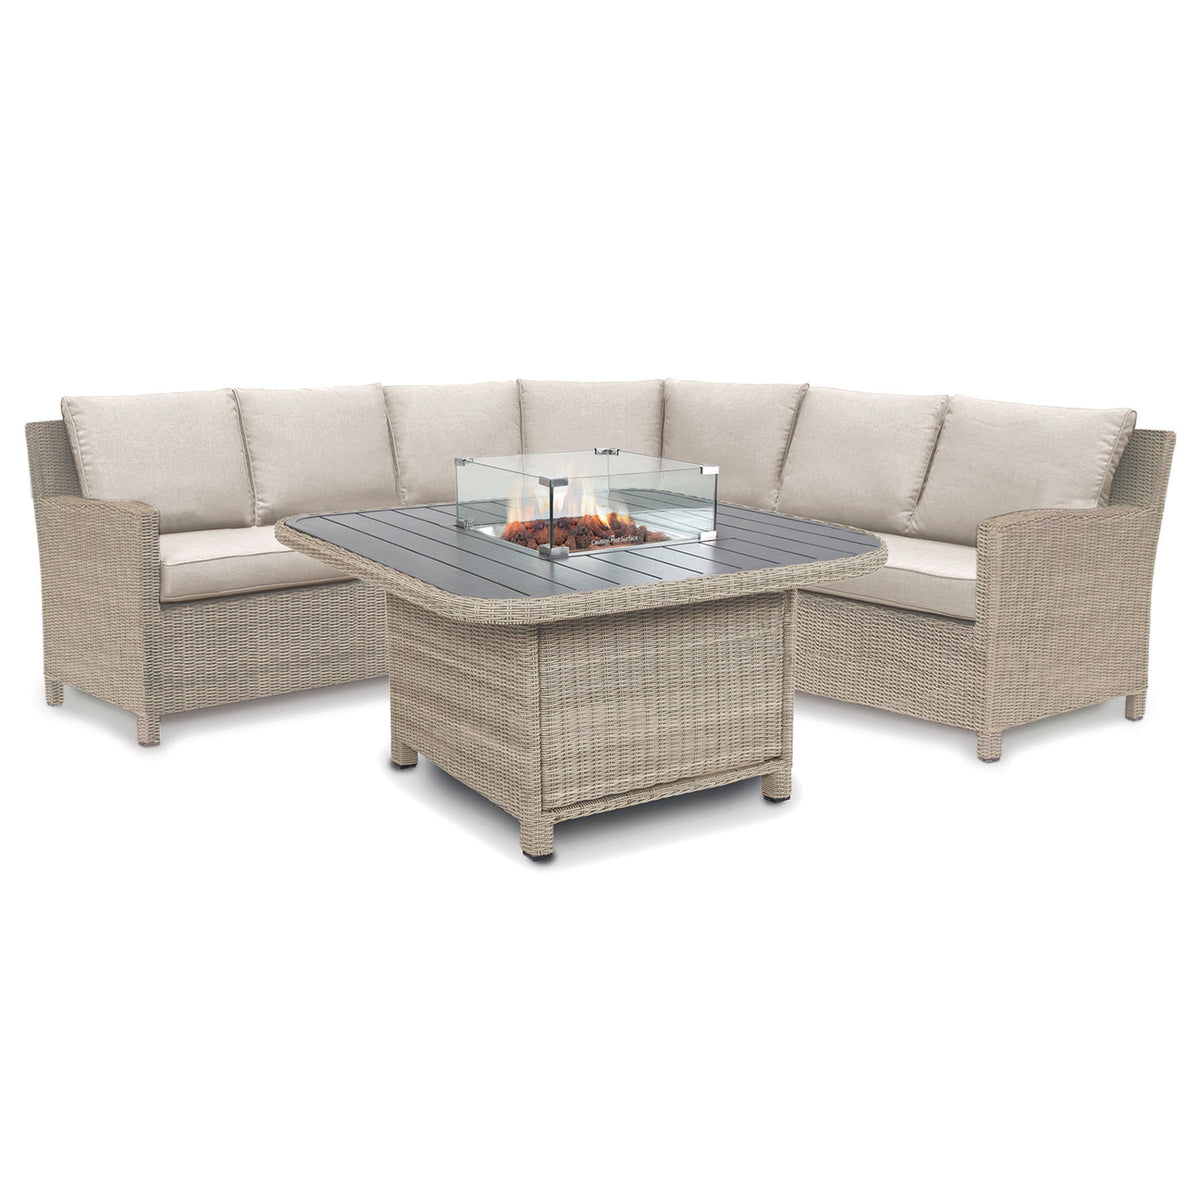 Kettler Palma Grande Corner Sofa Set with Fire Pit Table (Oyster Wicker)